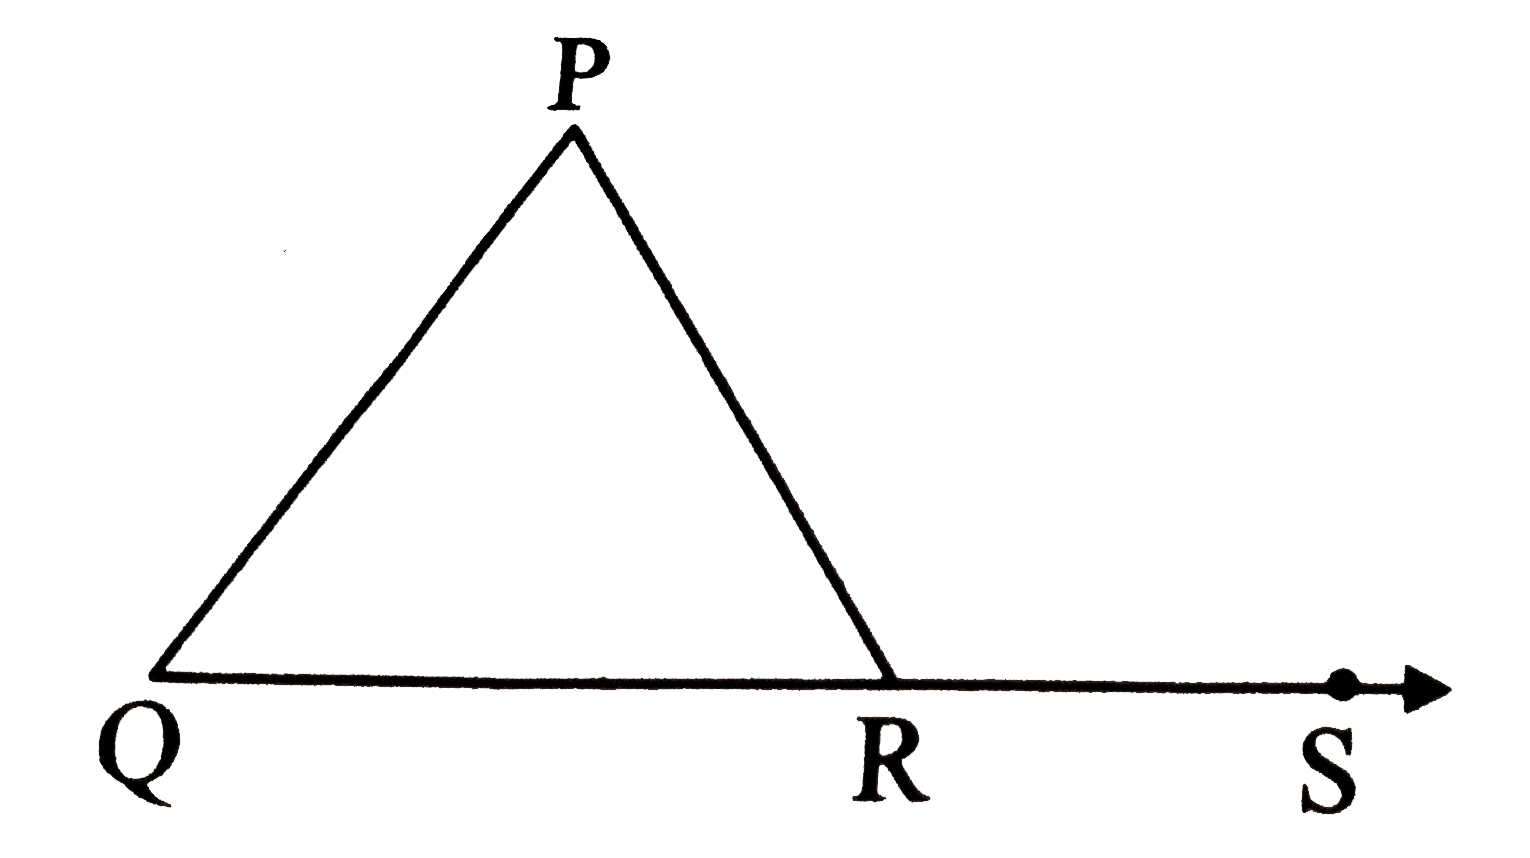 In the givne figure ,  anglePRS  is the exterior angle of  DeltaPQR . If  angleP=55^(@)  and  angleQ=64^(@), then find  anglePRS .